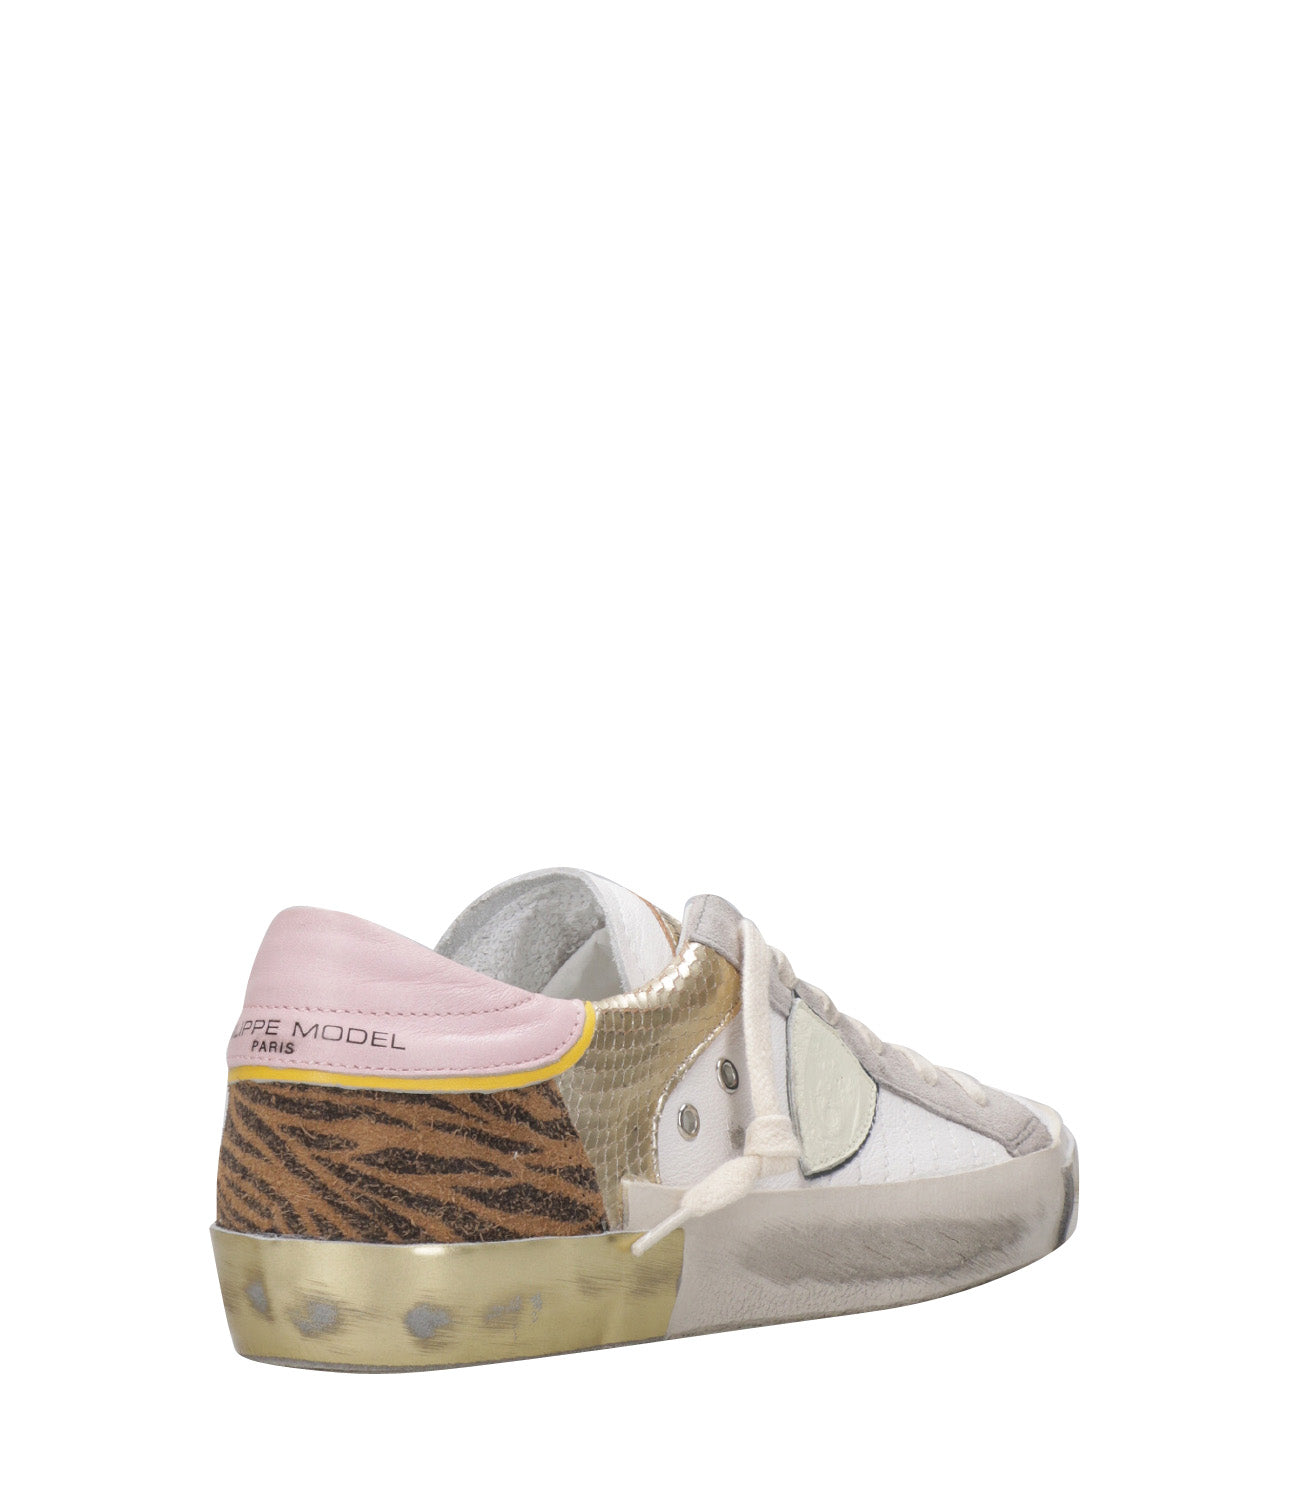 Philippe Model | Sneakers Prsx Low Woman White, Beige and Pink